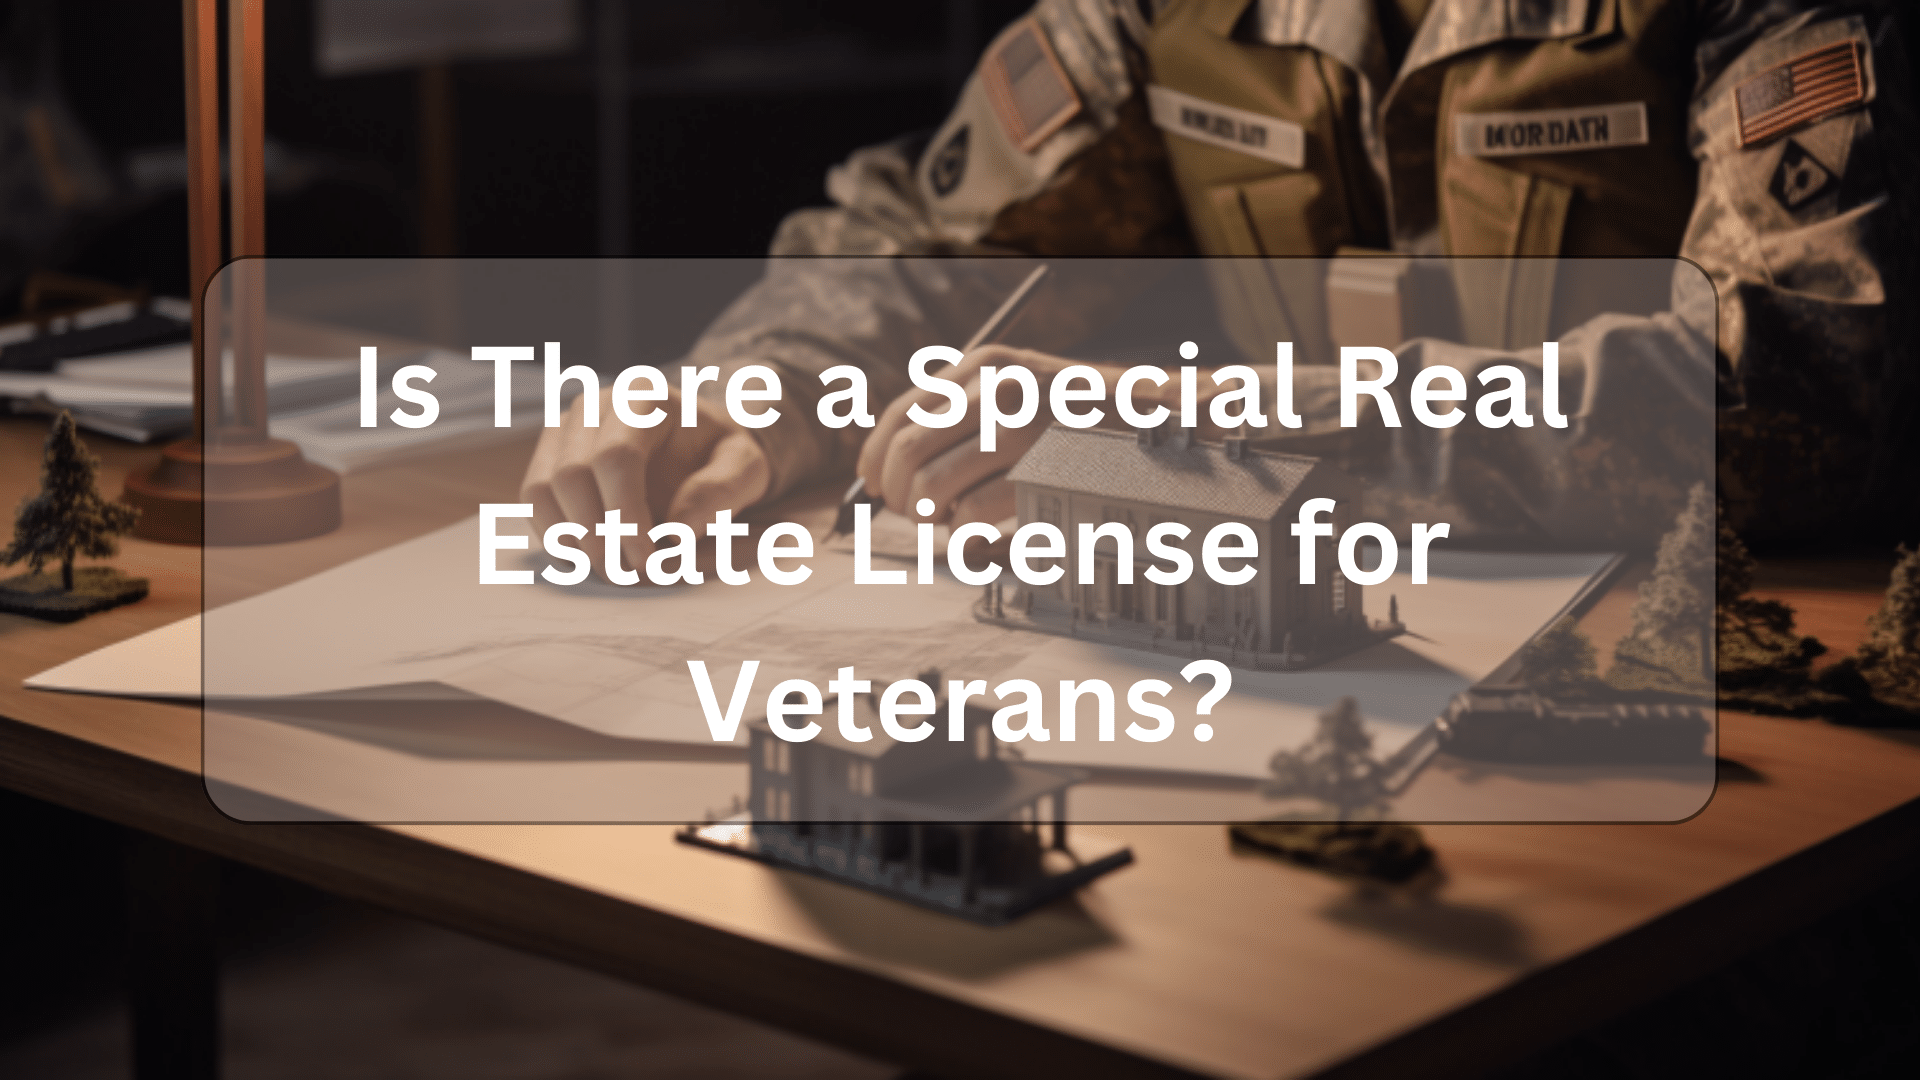 Is There a Special Real Estate License for Veterans?